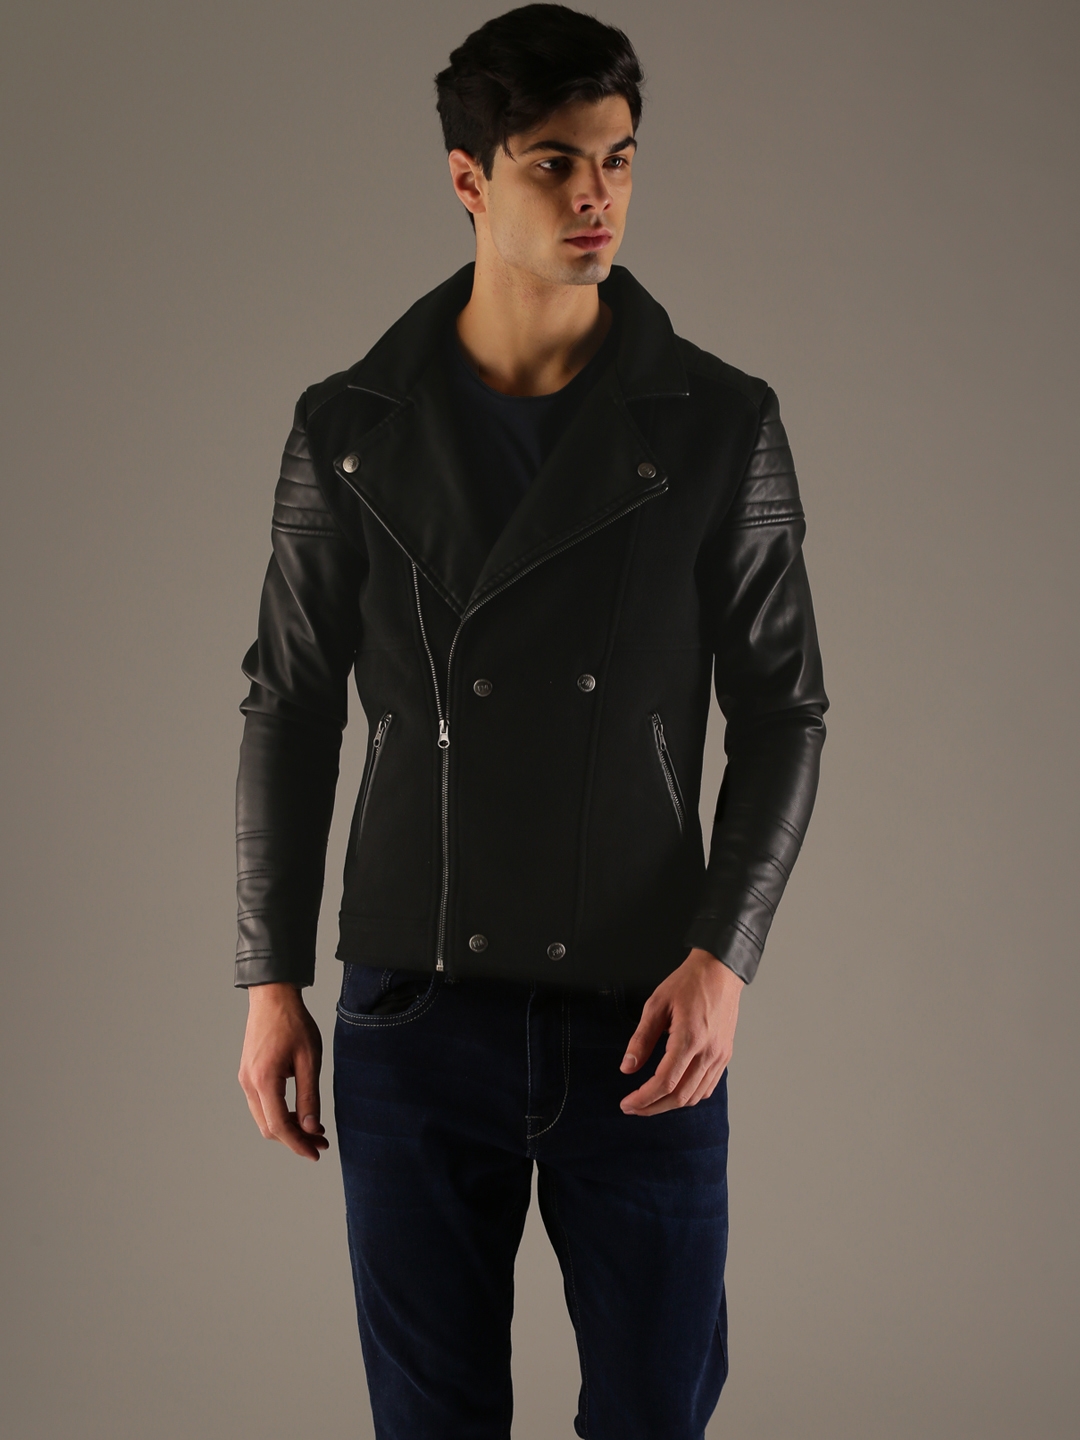 80% Off on FLYING MACHINE Jacket | Jackets, Online shopping stores, 80's-thanhphatduhoc.com.vn